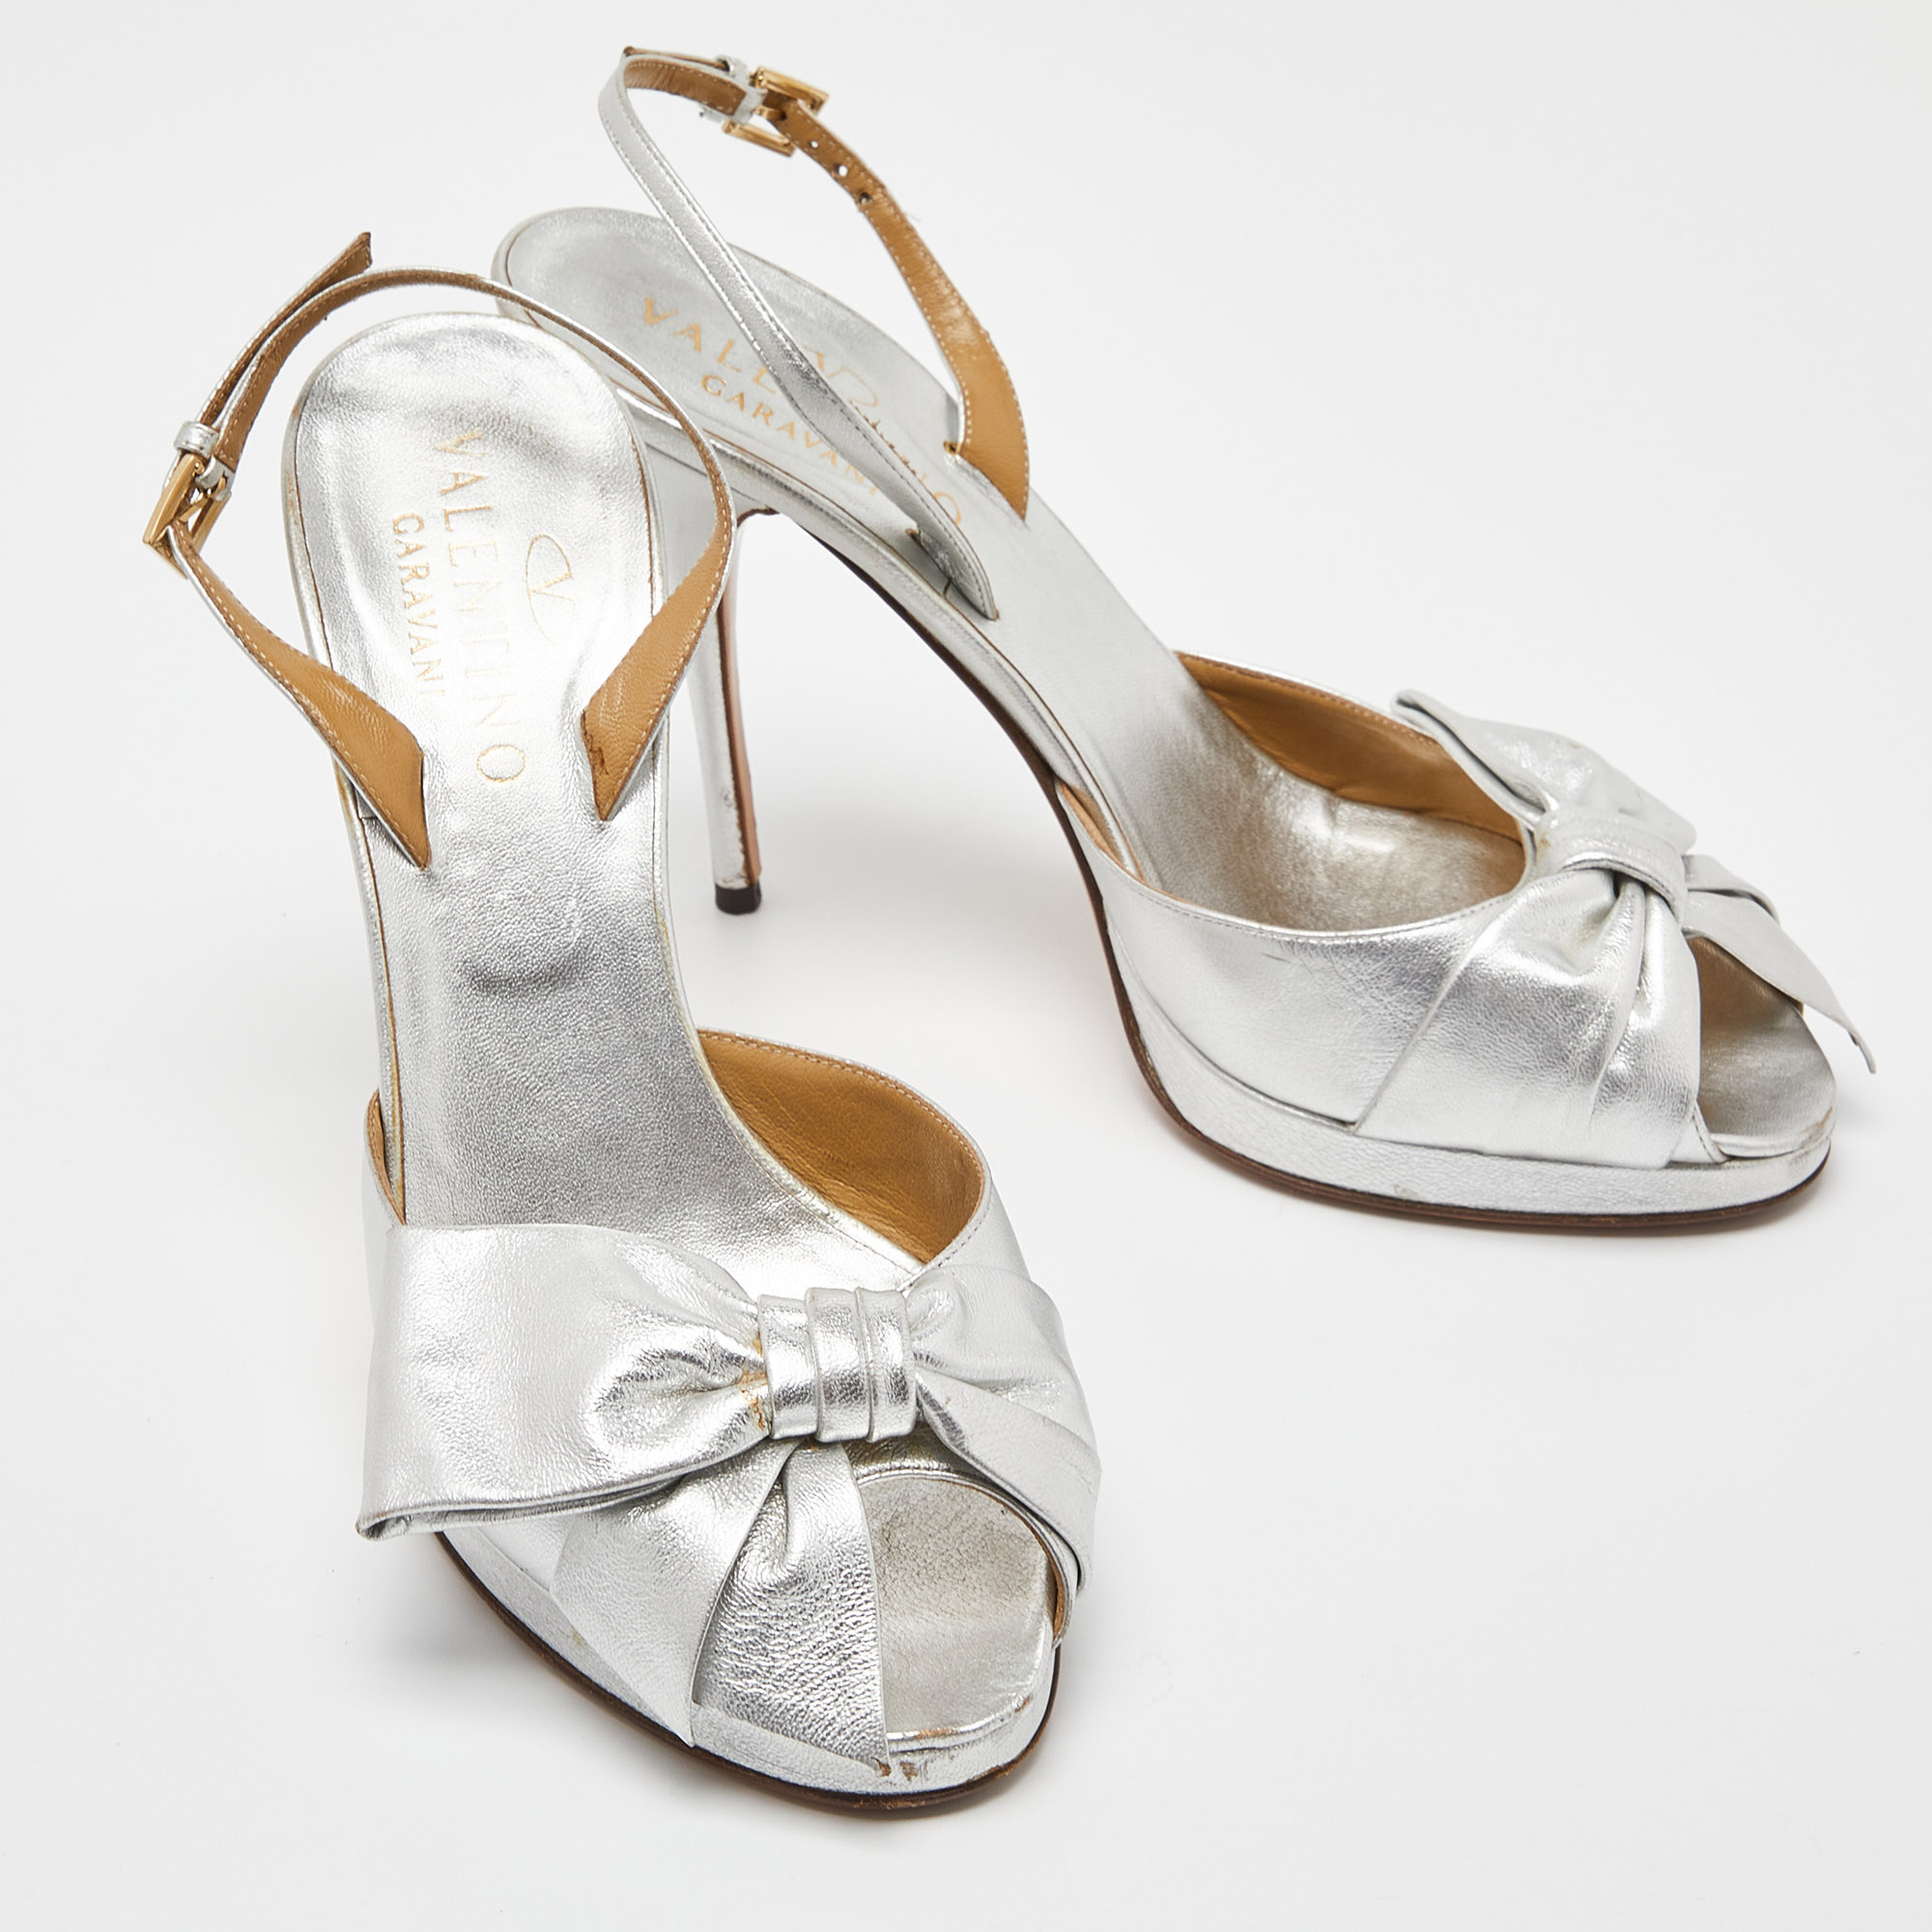 Valentino Silver Leather Bow Slingback Sandals Size 39